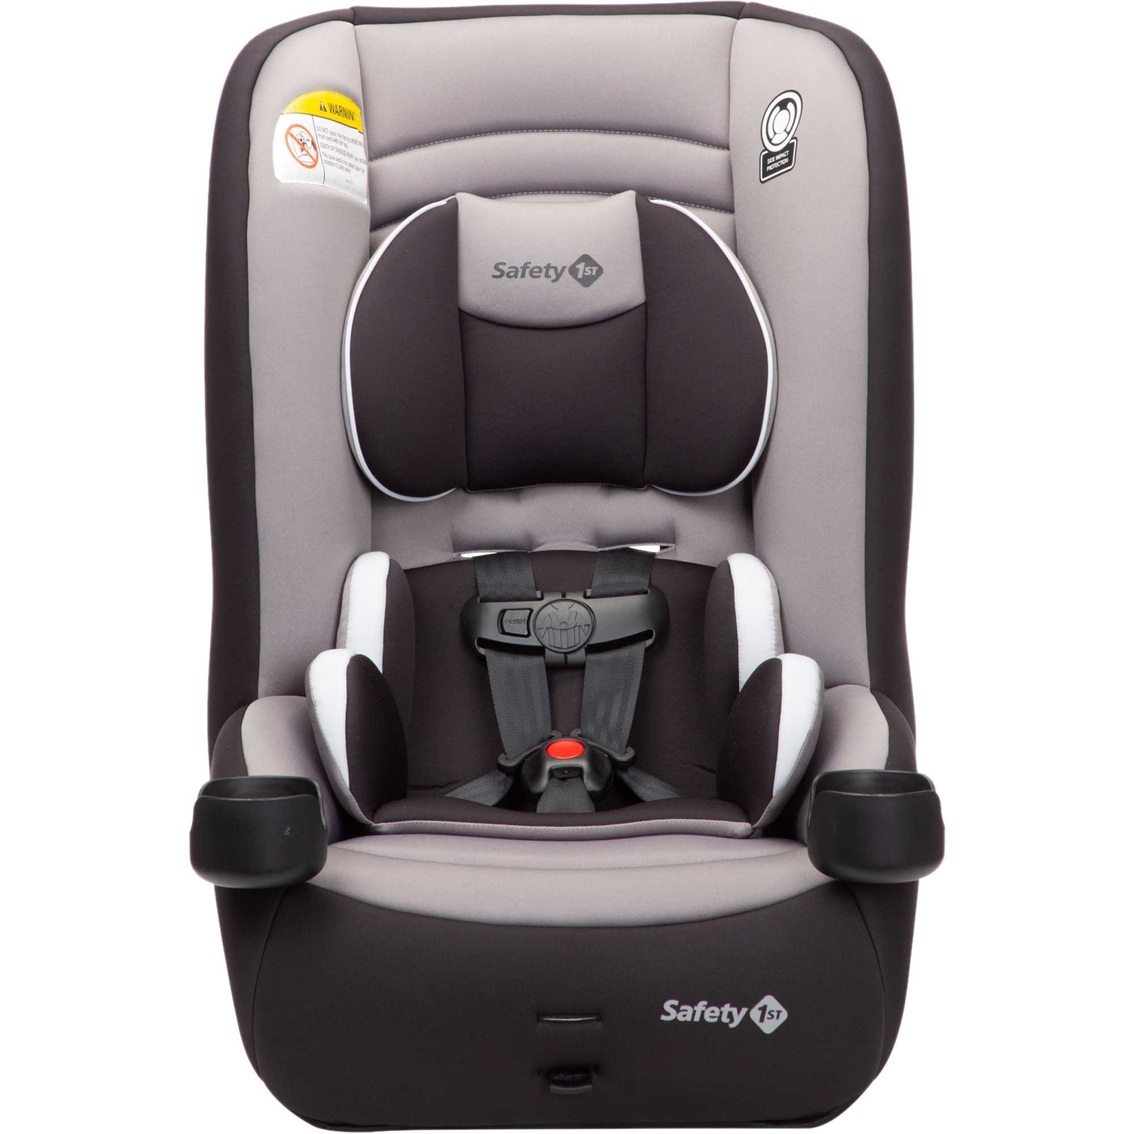 Safety 1st Jive 2-in-1 Convertible Car Seat - Image 1 of 10